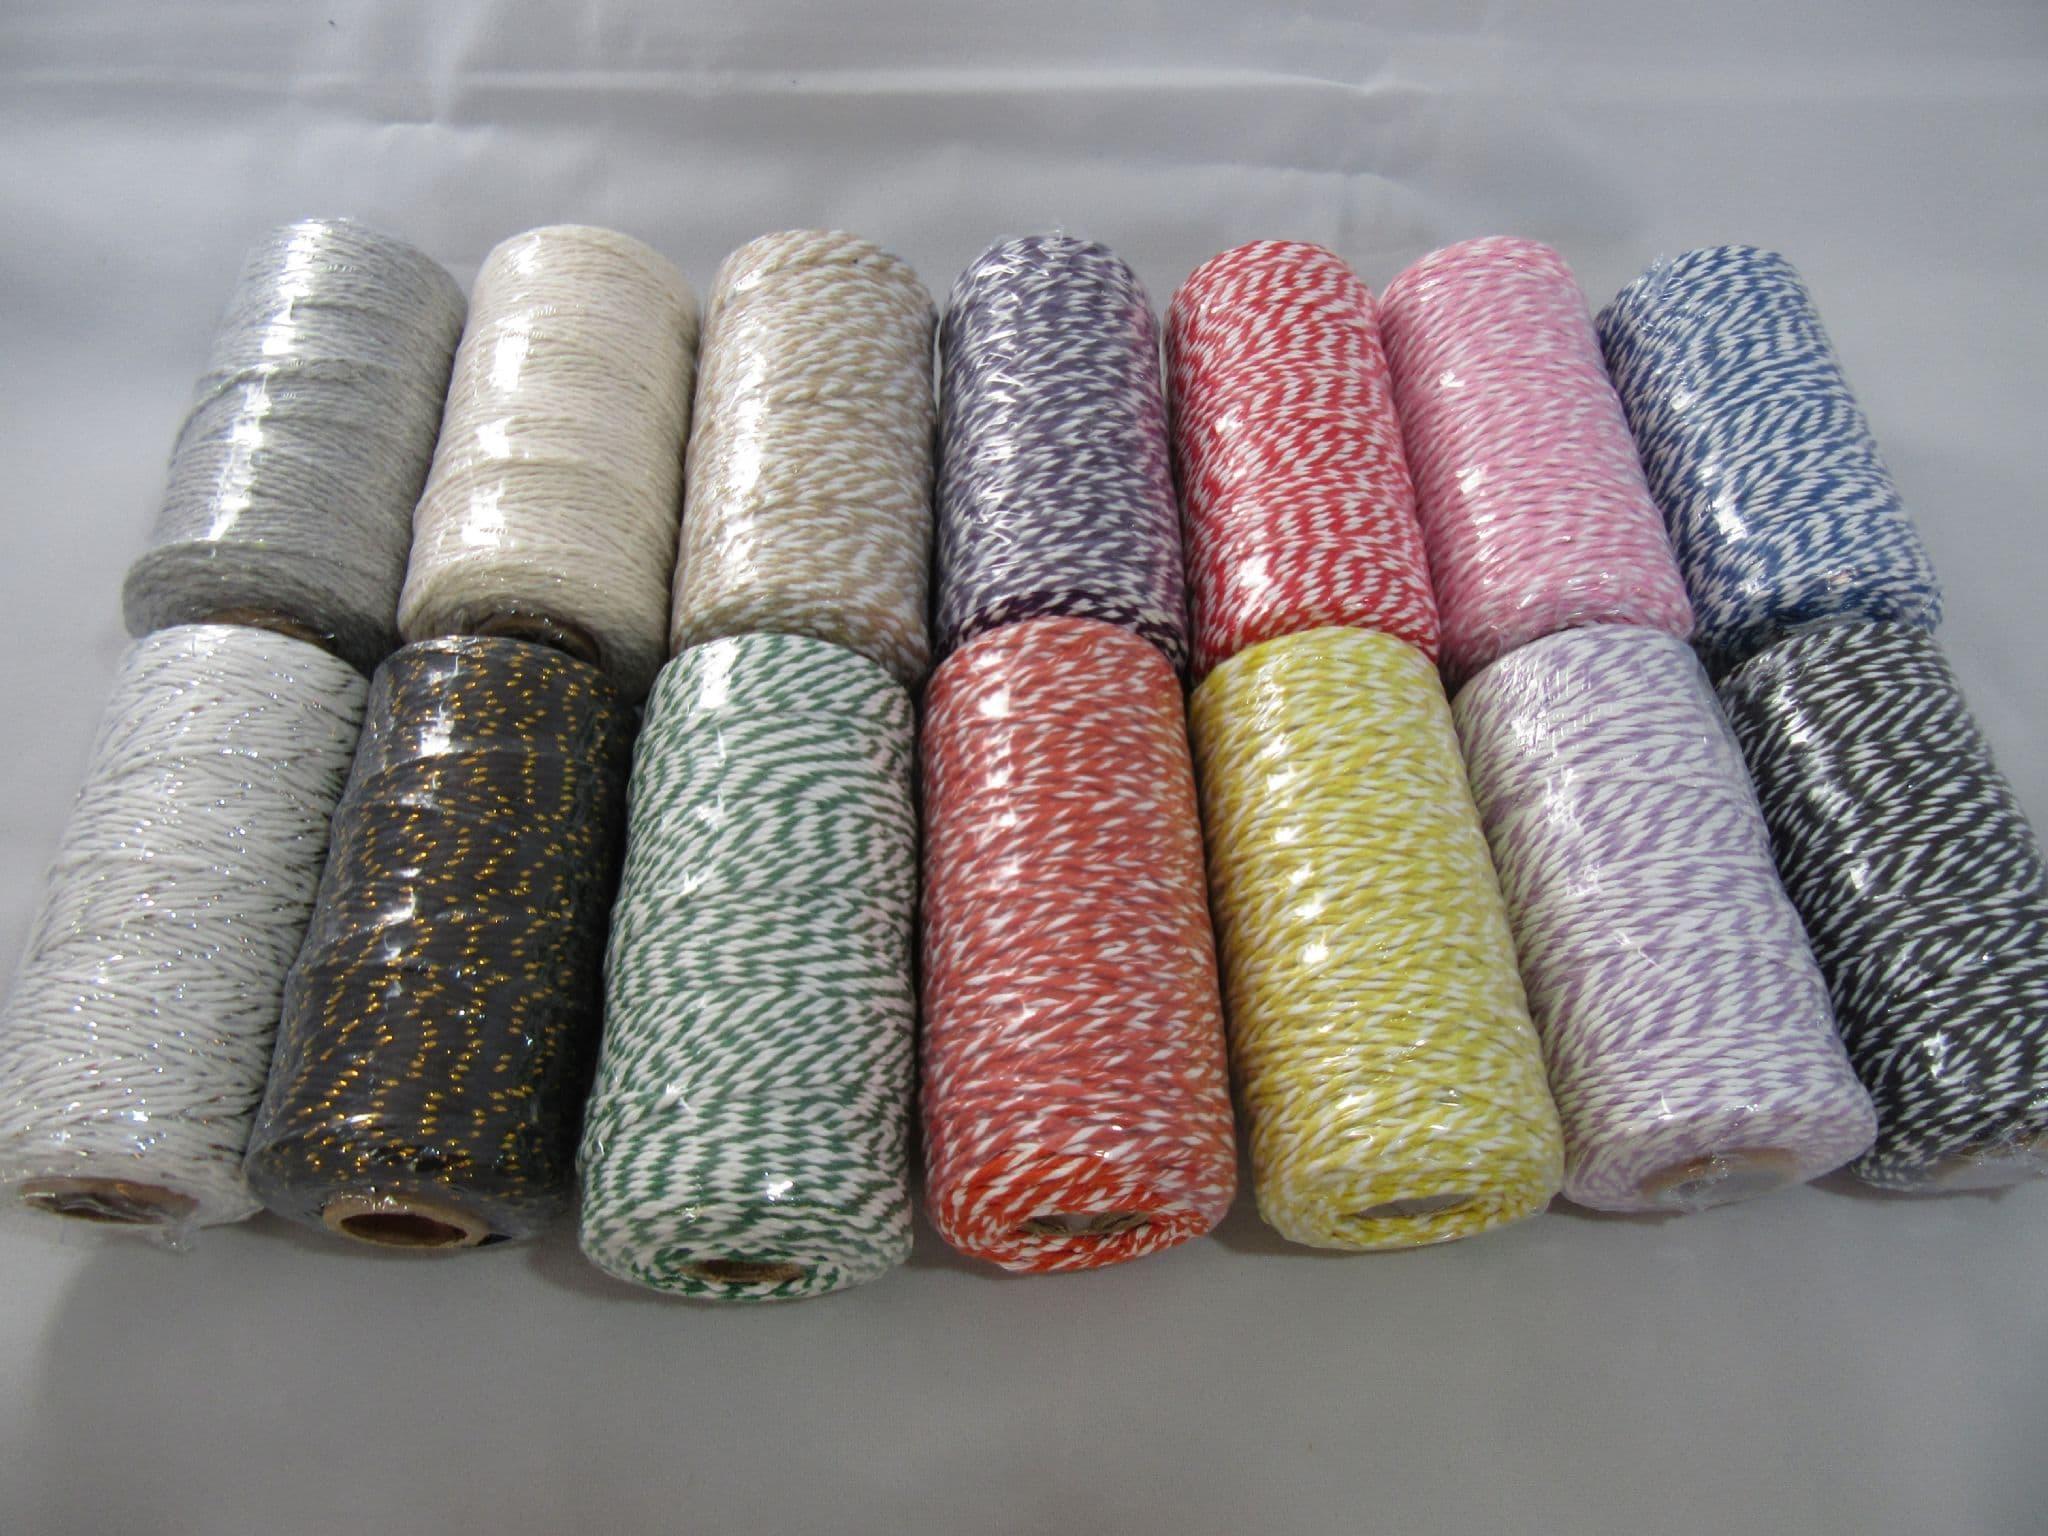 2 metres or Full 100m Roll 1mm Bakers Twine Rope String Thread